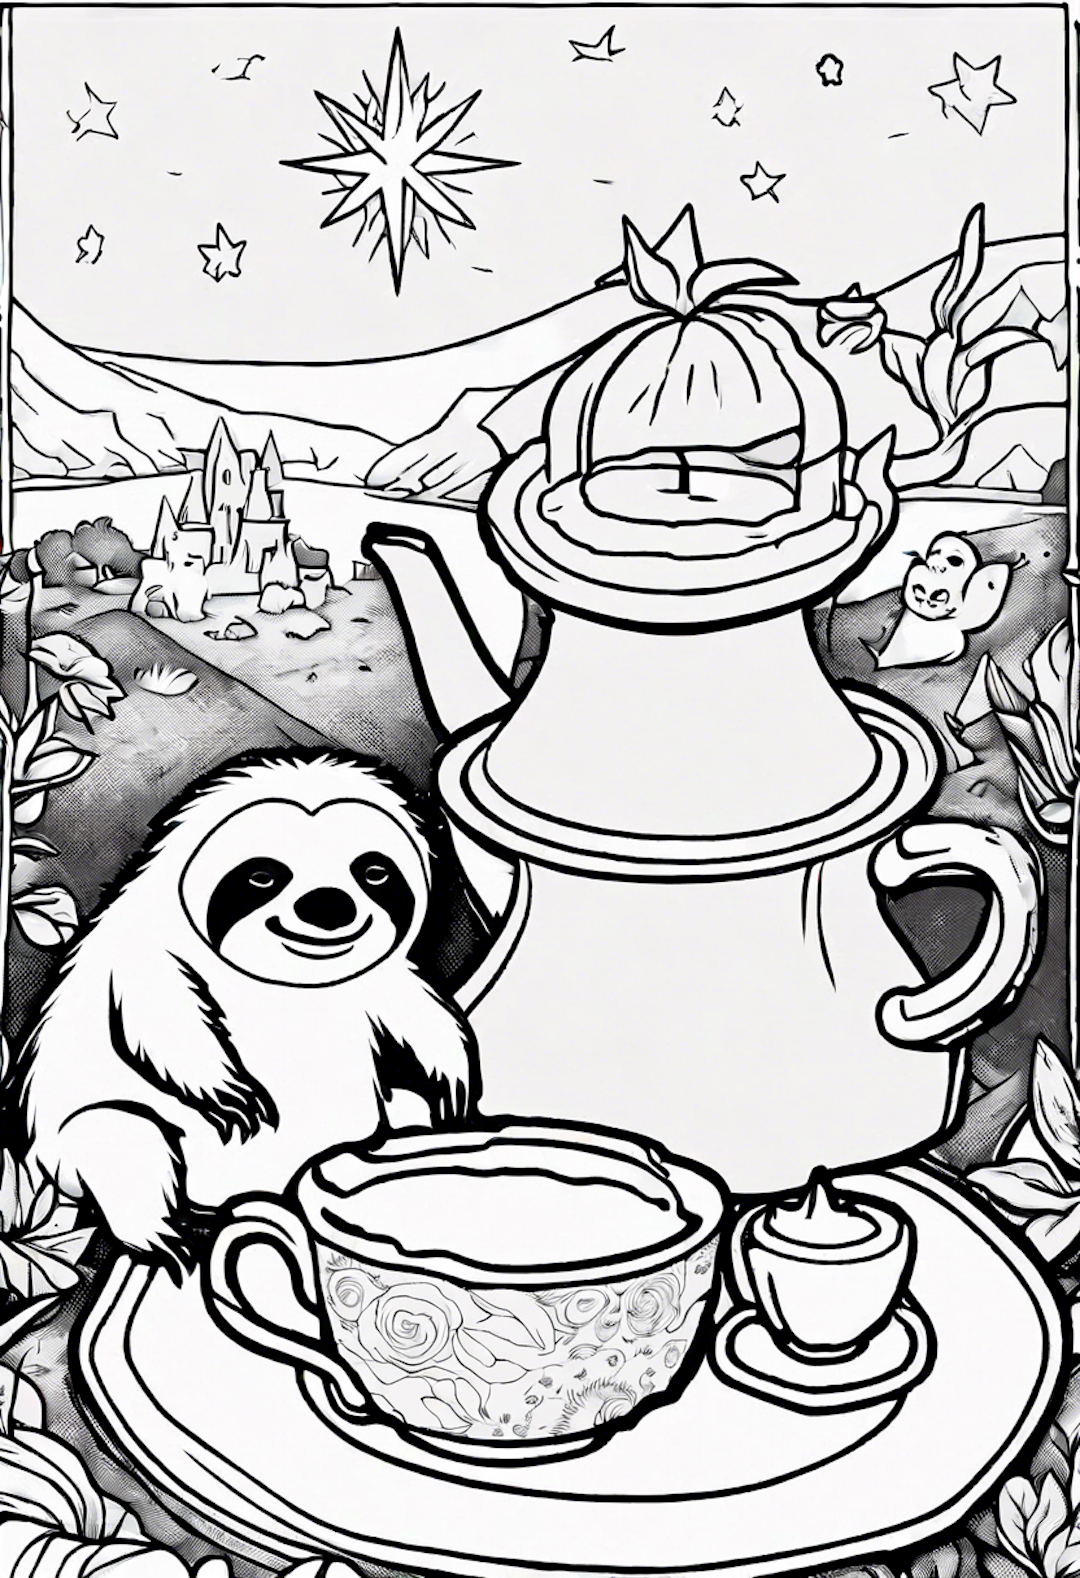 A Relaxed Star Having A Tea Party With A Friendly Sloth